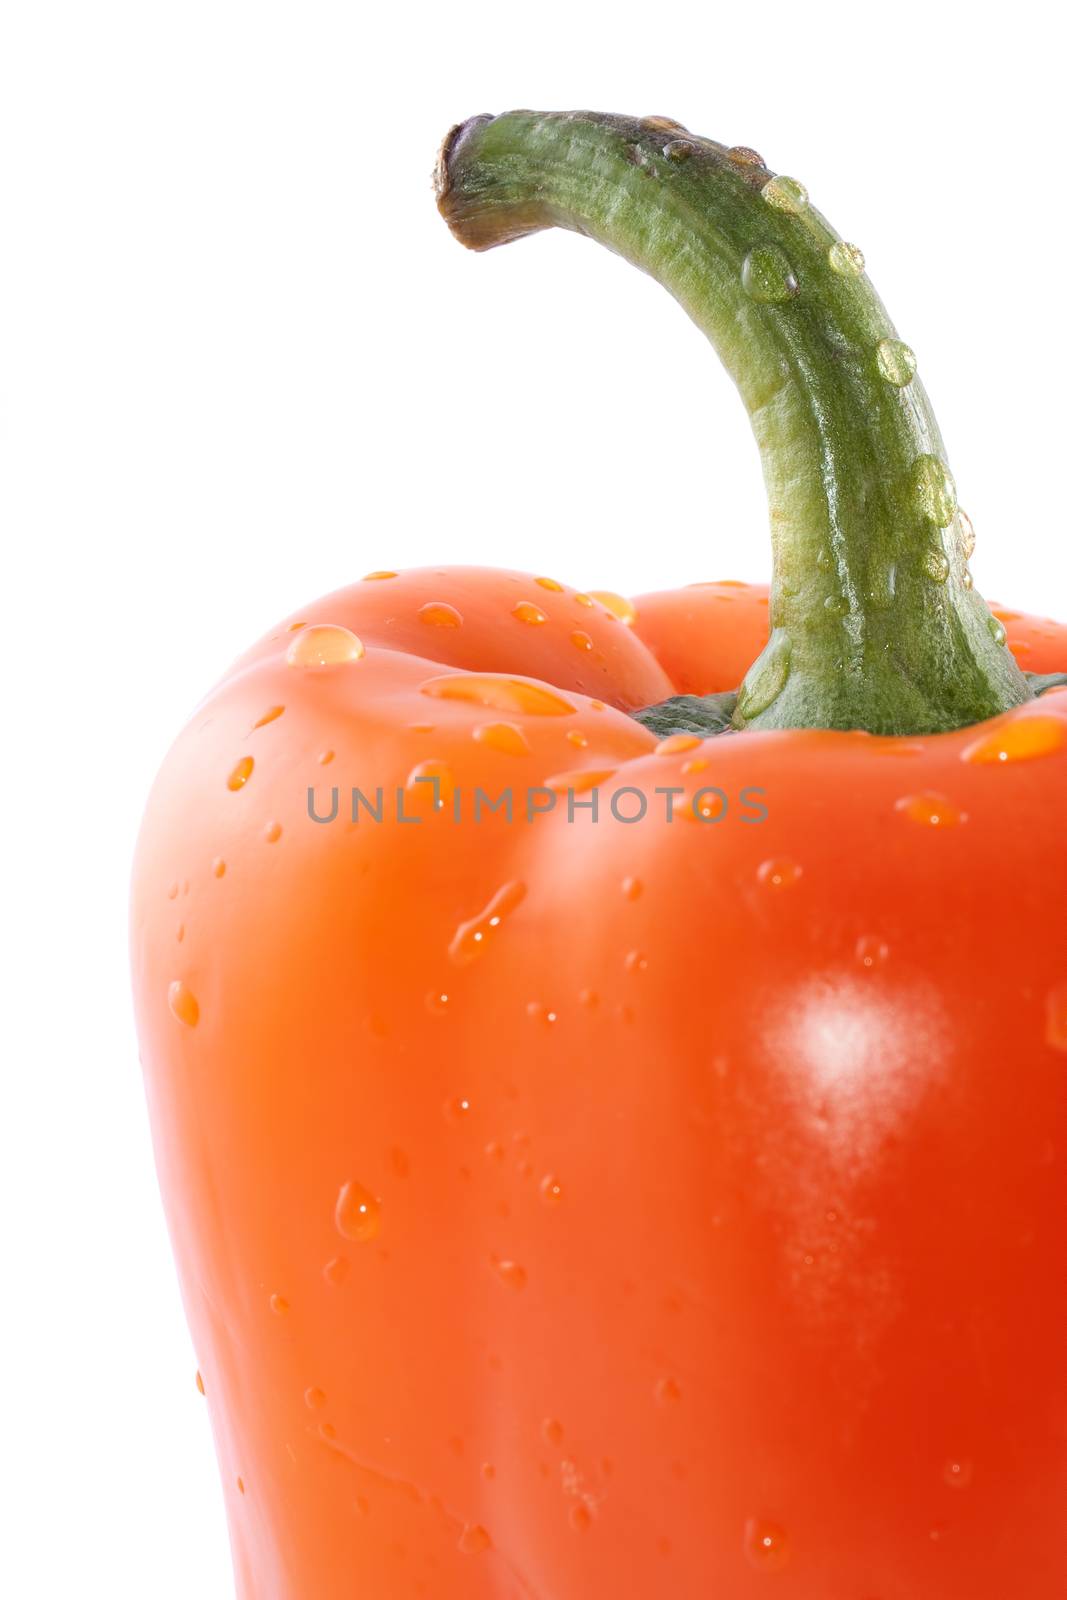 Juicy orange pepper with drops of water on a white background.